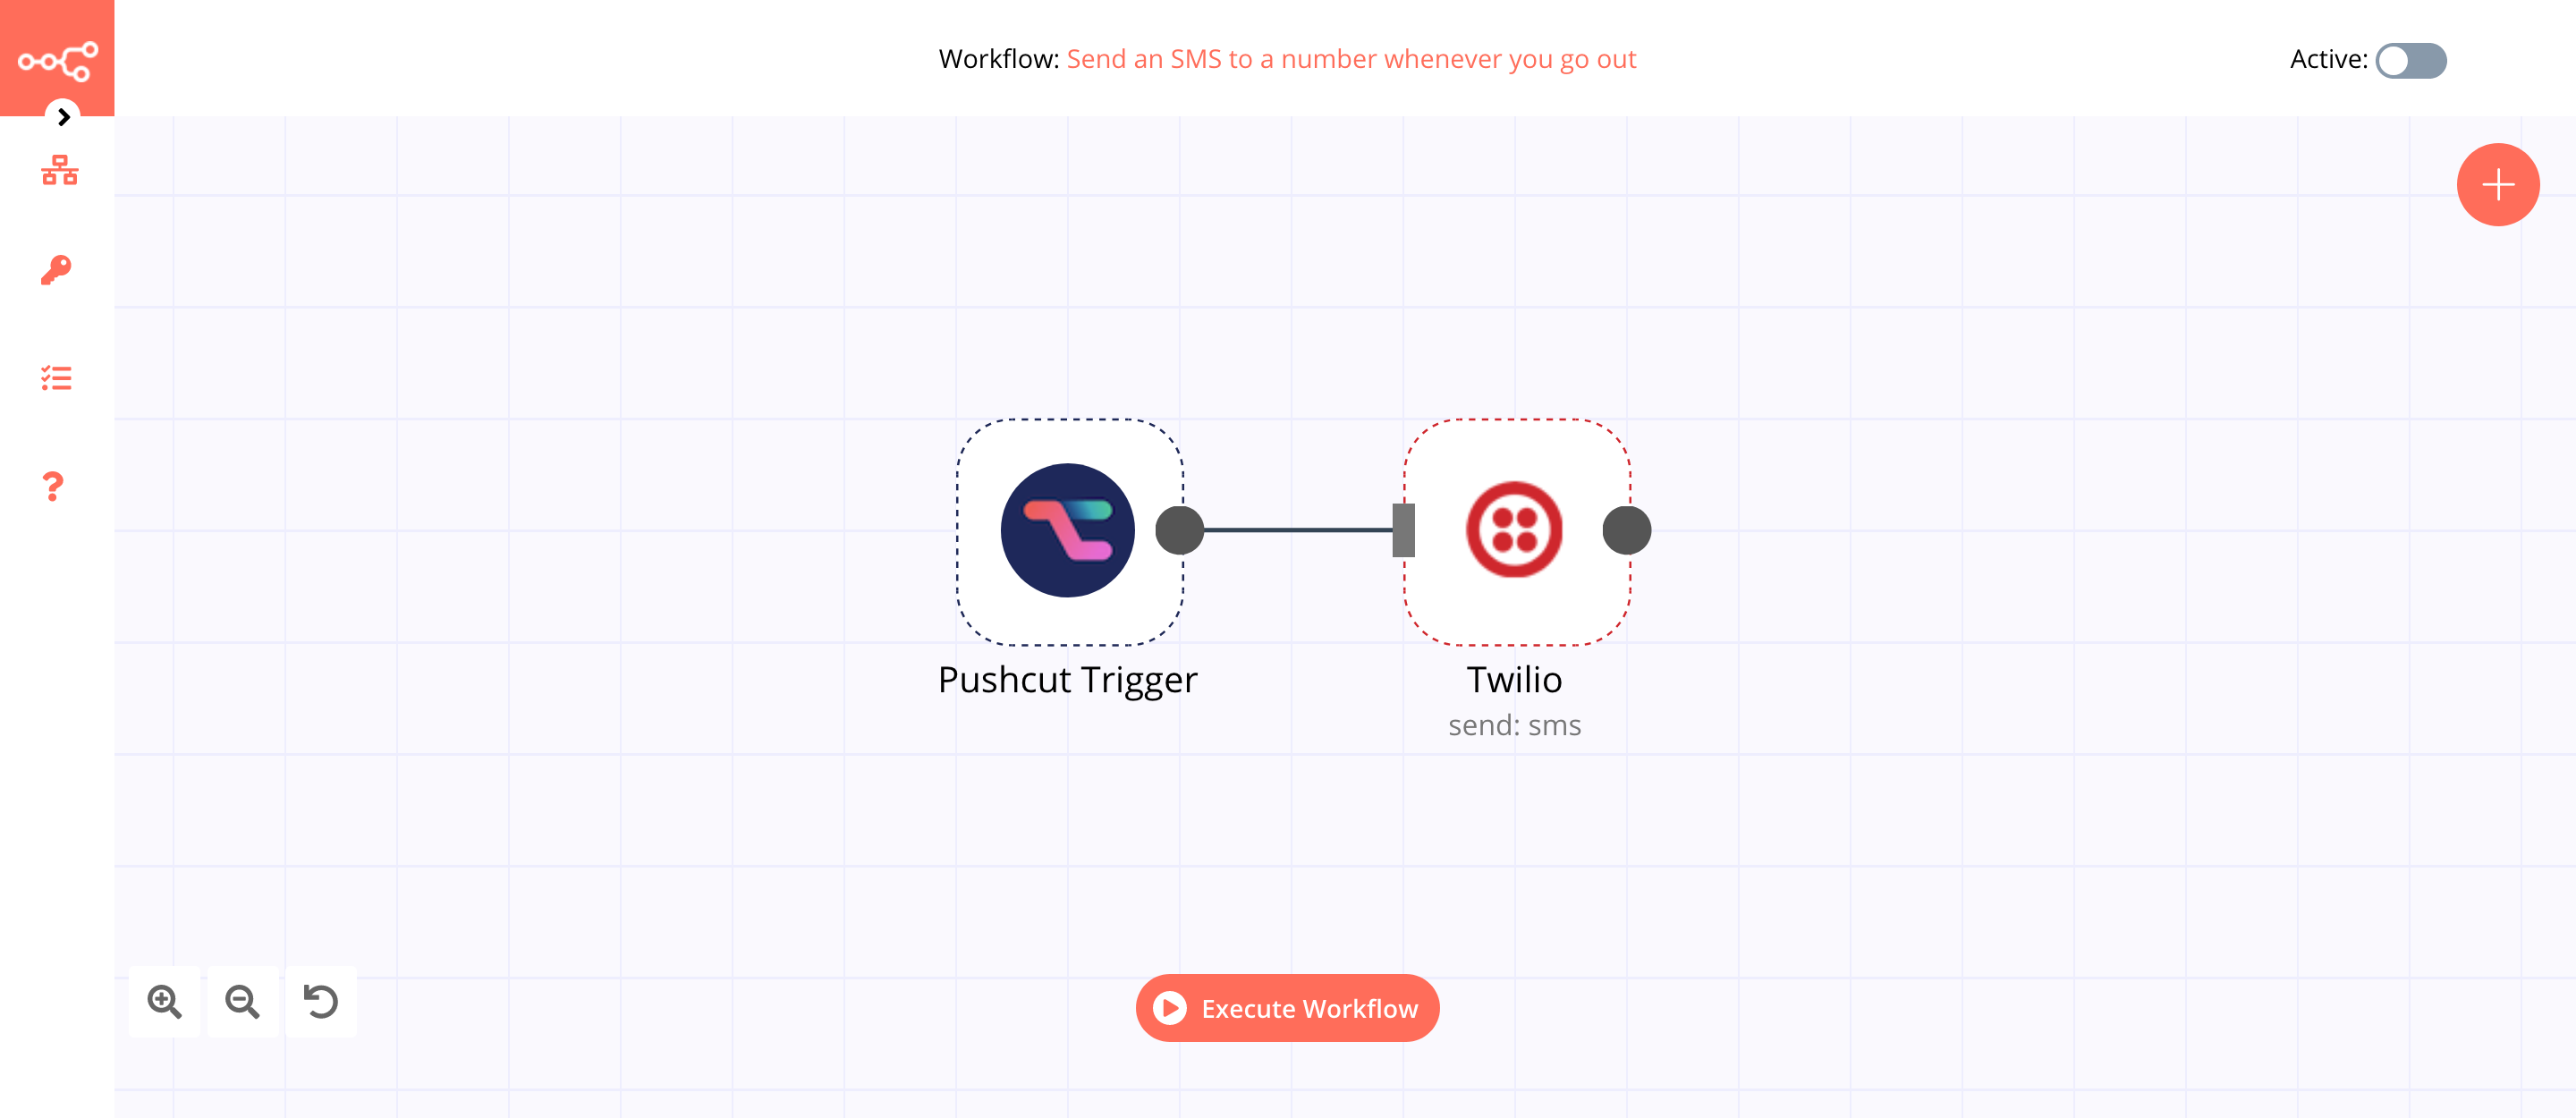 A workflow with the Pushcut Trigger node